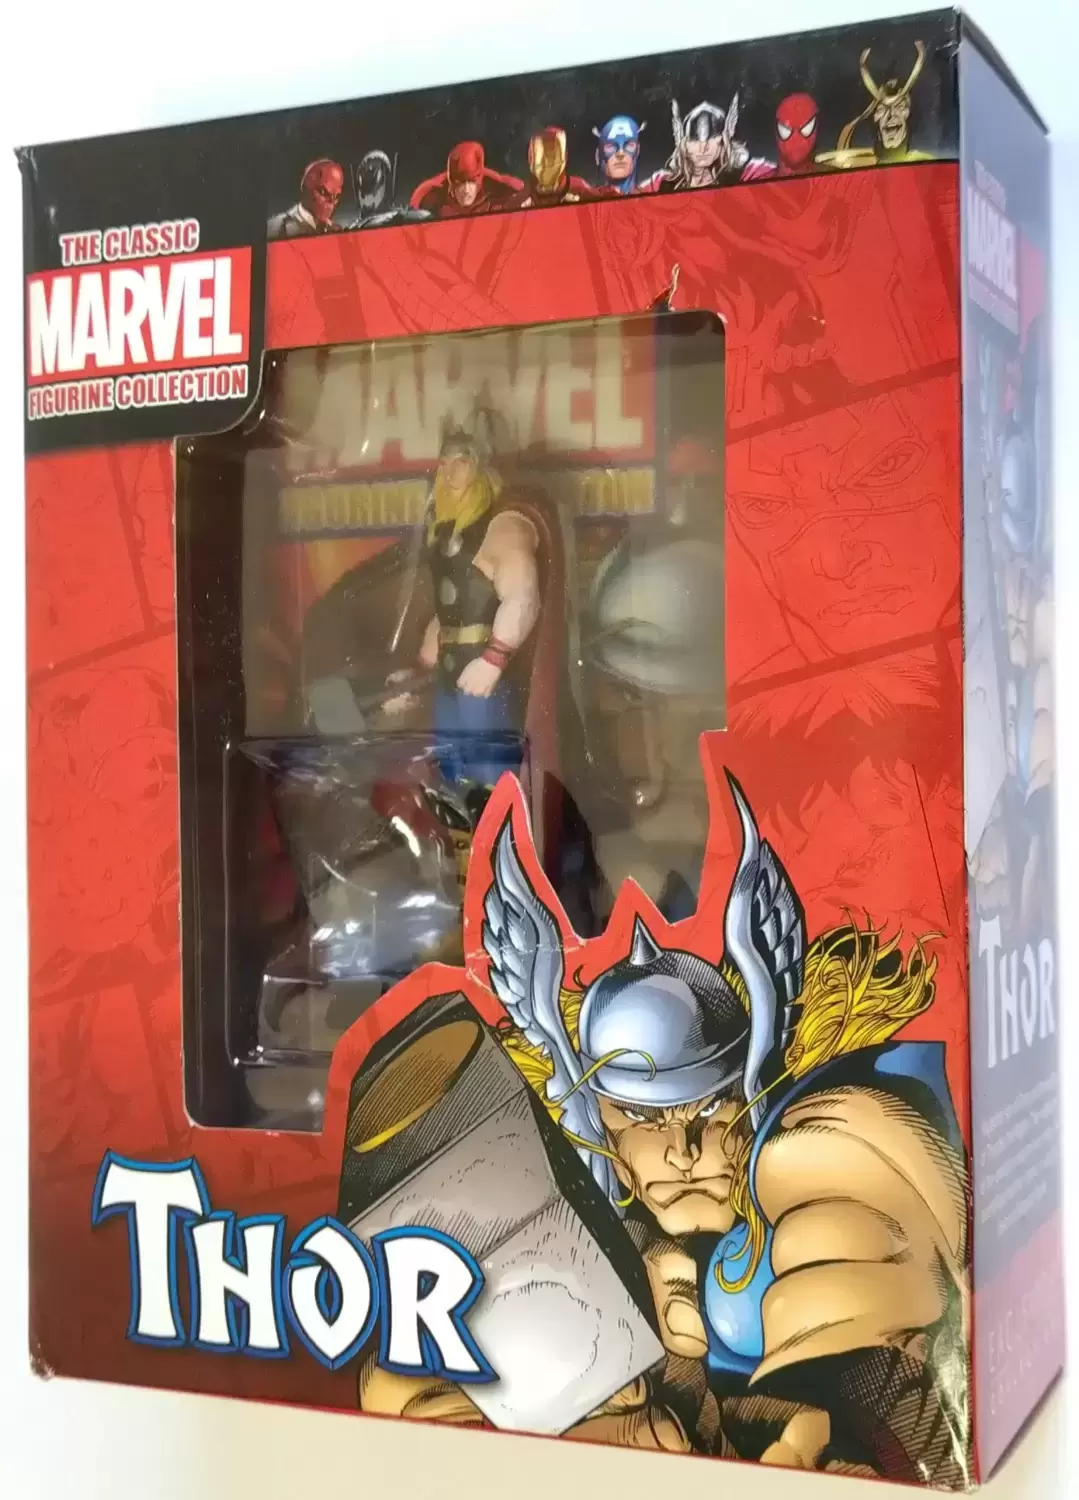 The Classic Marvel Figurine Collection - Thor